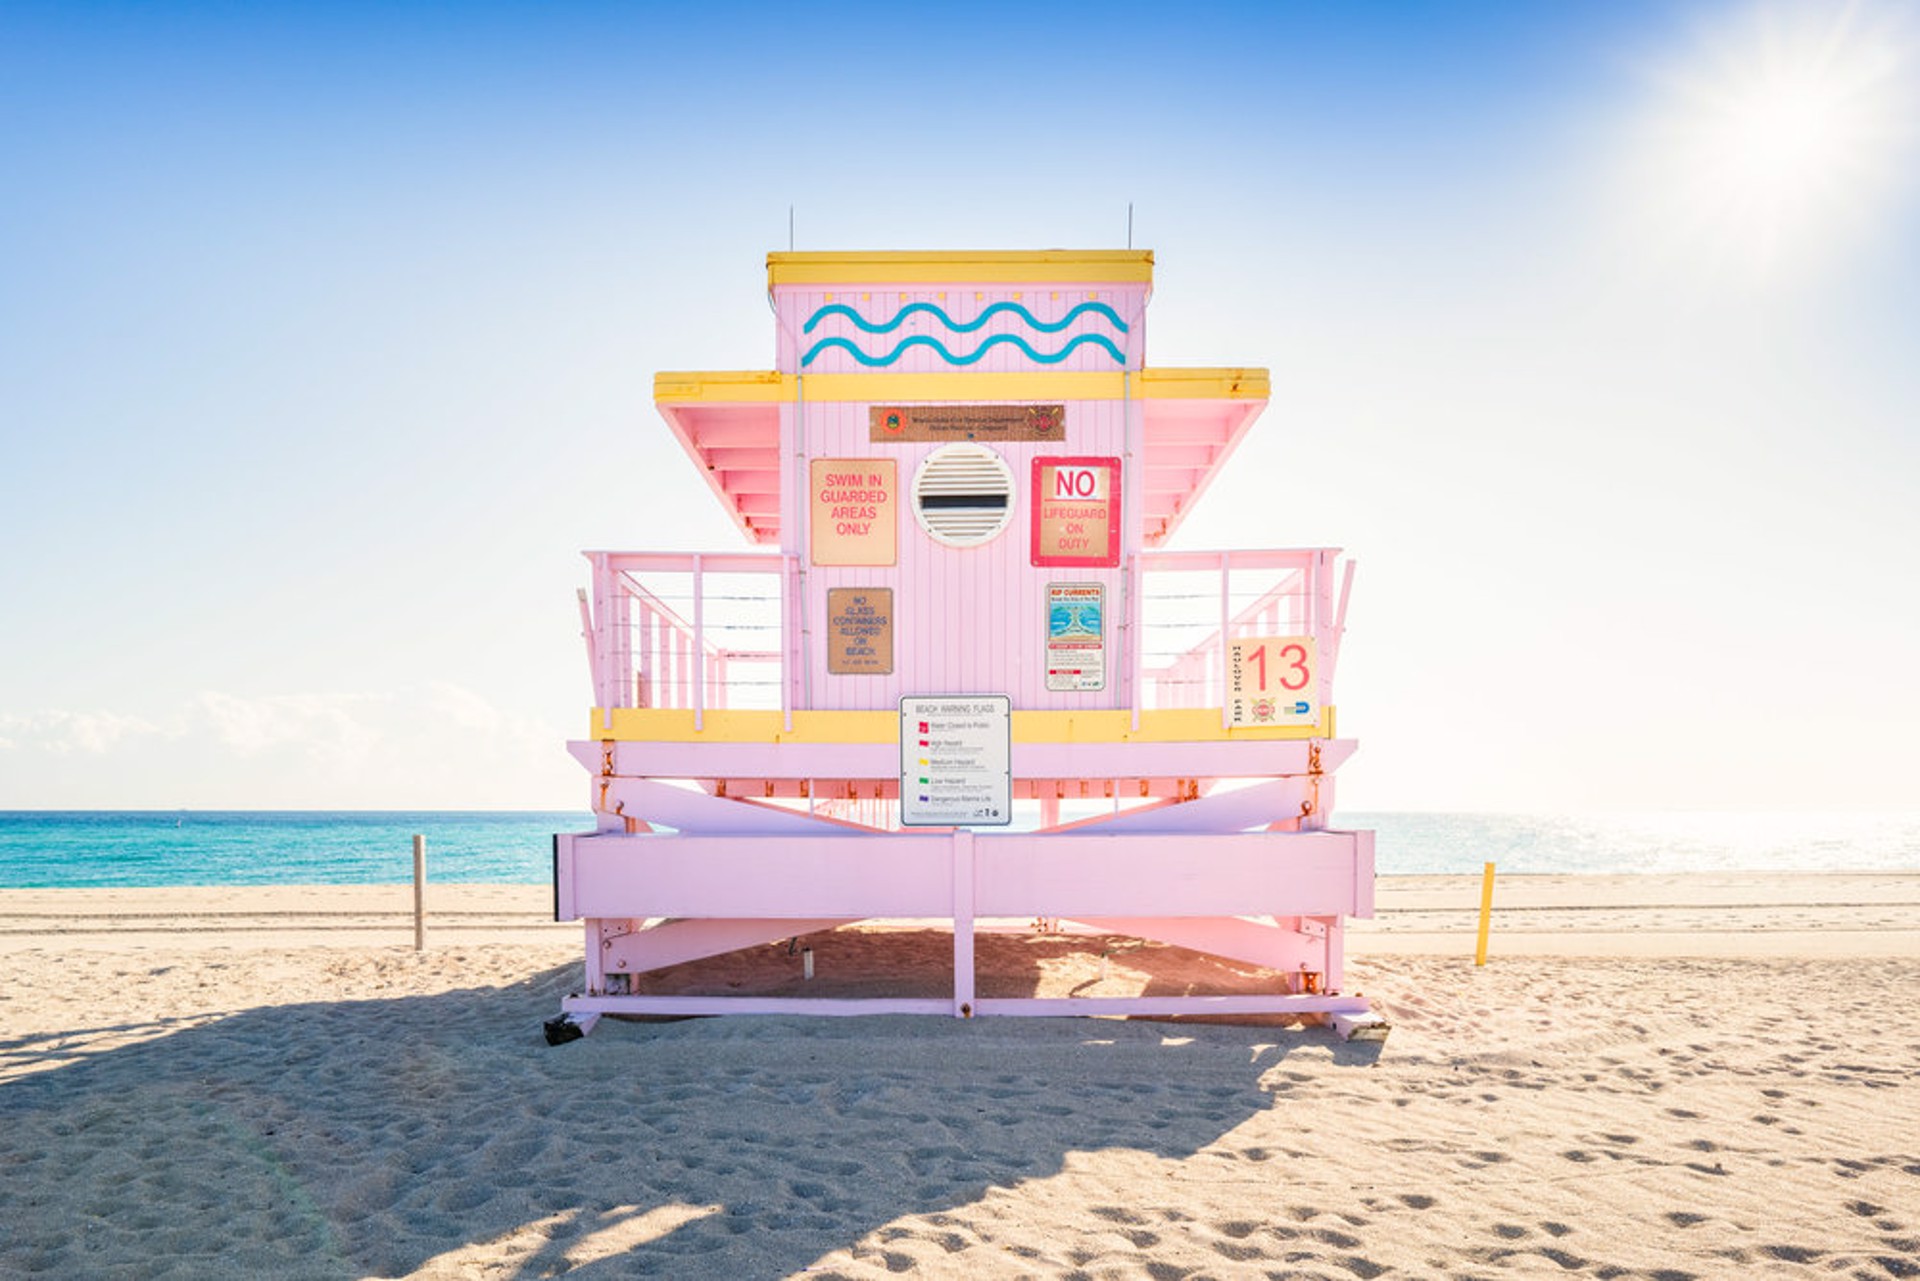 Haulover Beach Lifeguard Stand 13 by Peter Mendelson